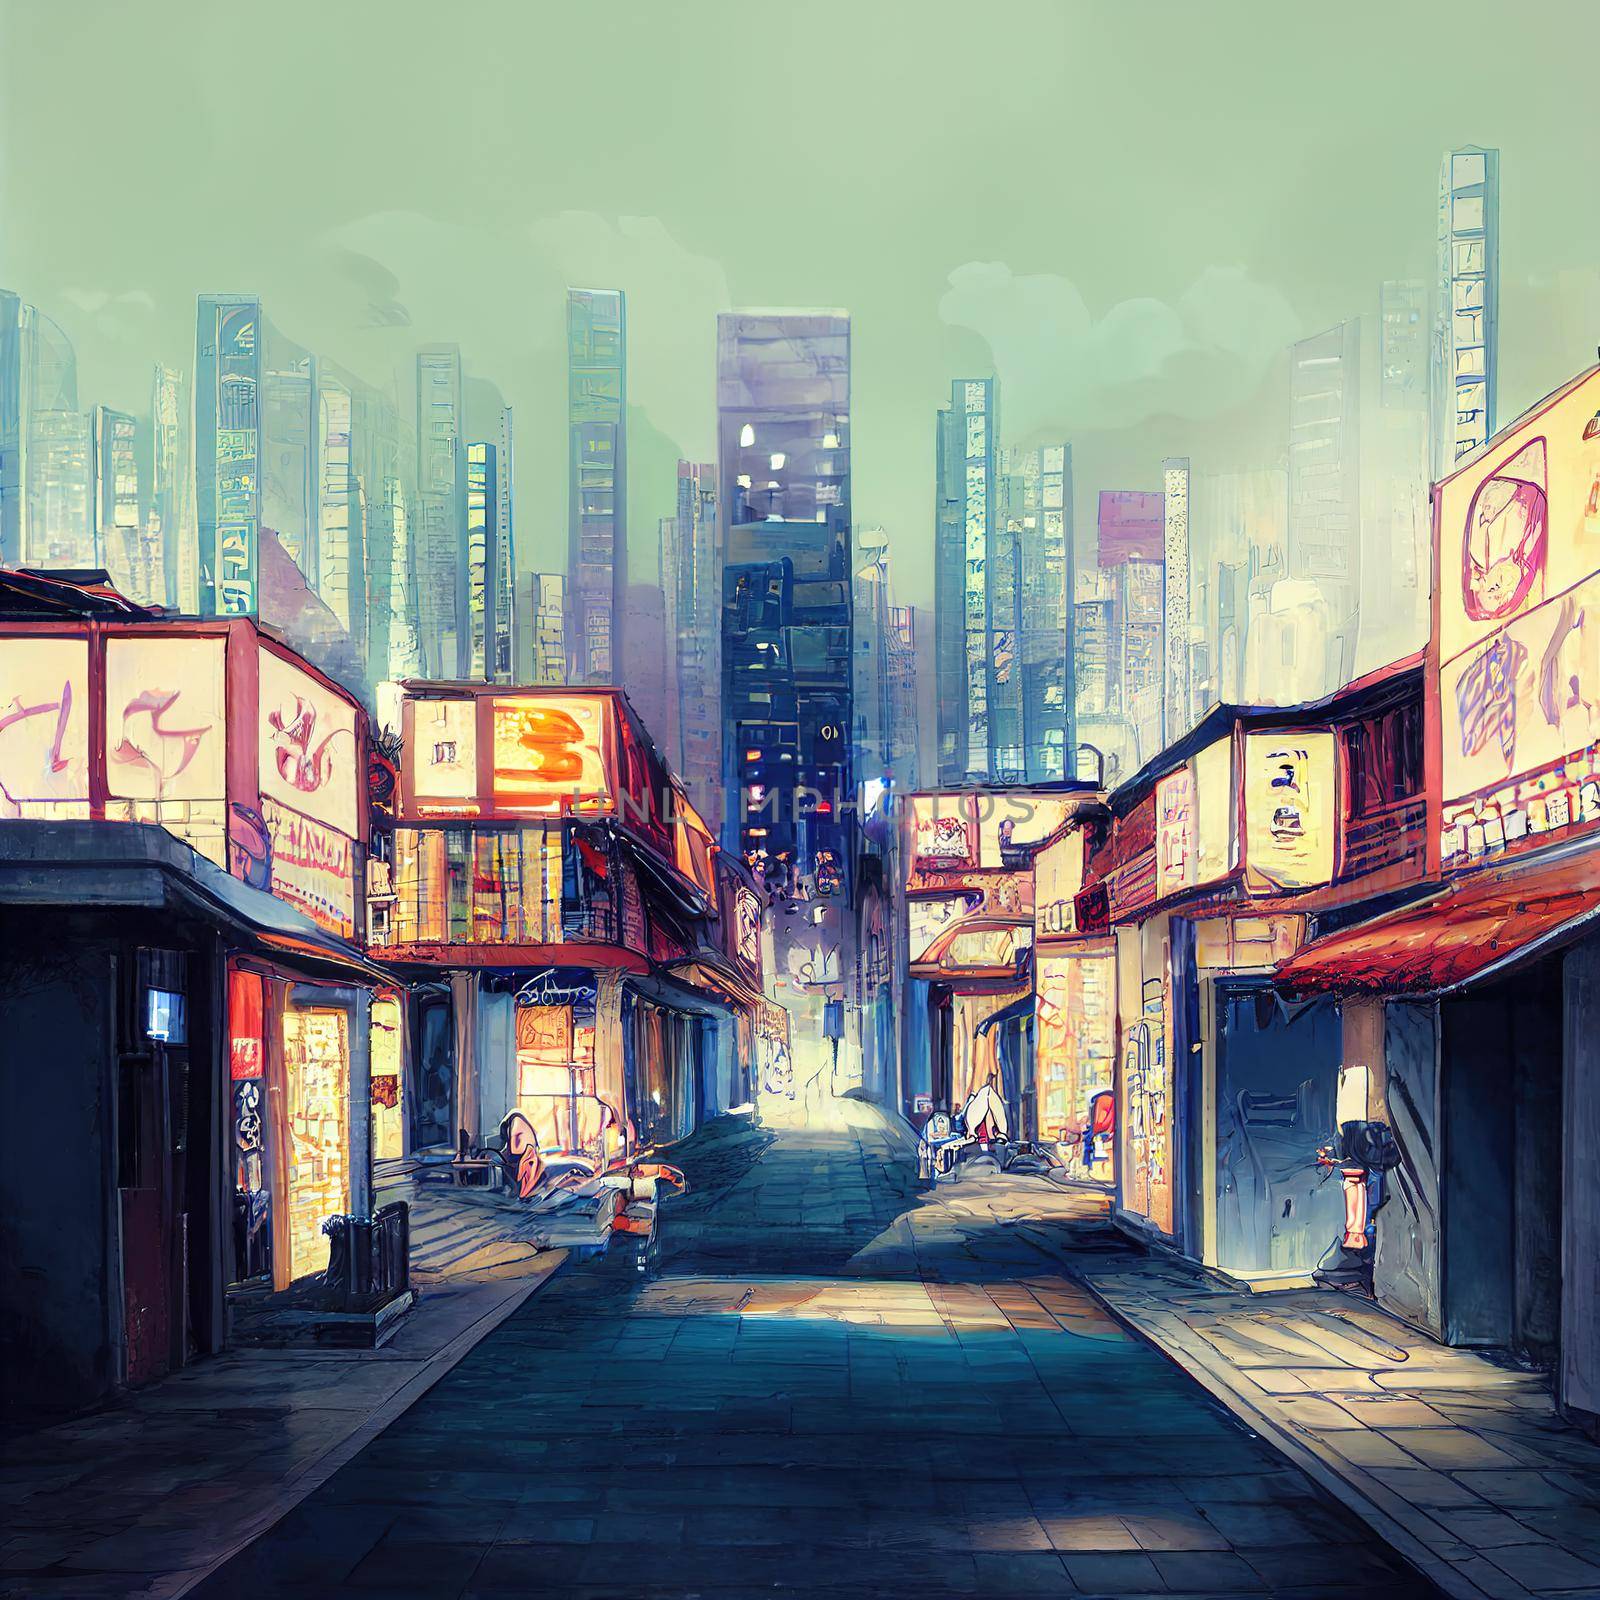 night time anime style city street with a lot of shops by 2ragon